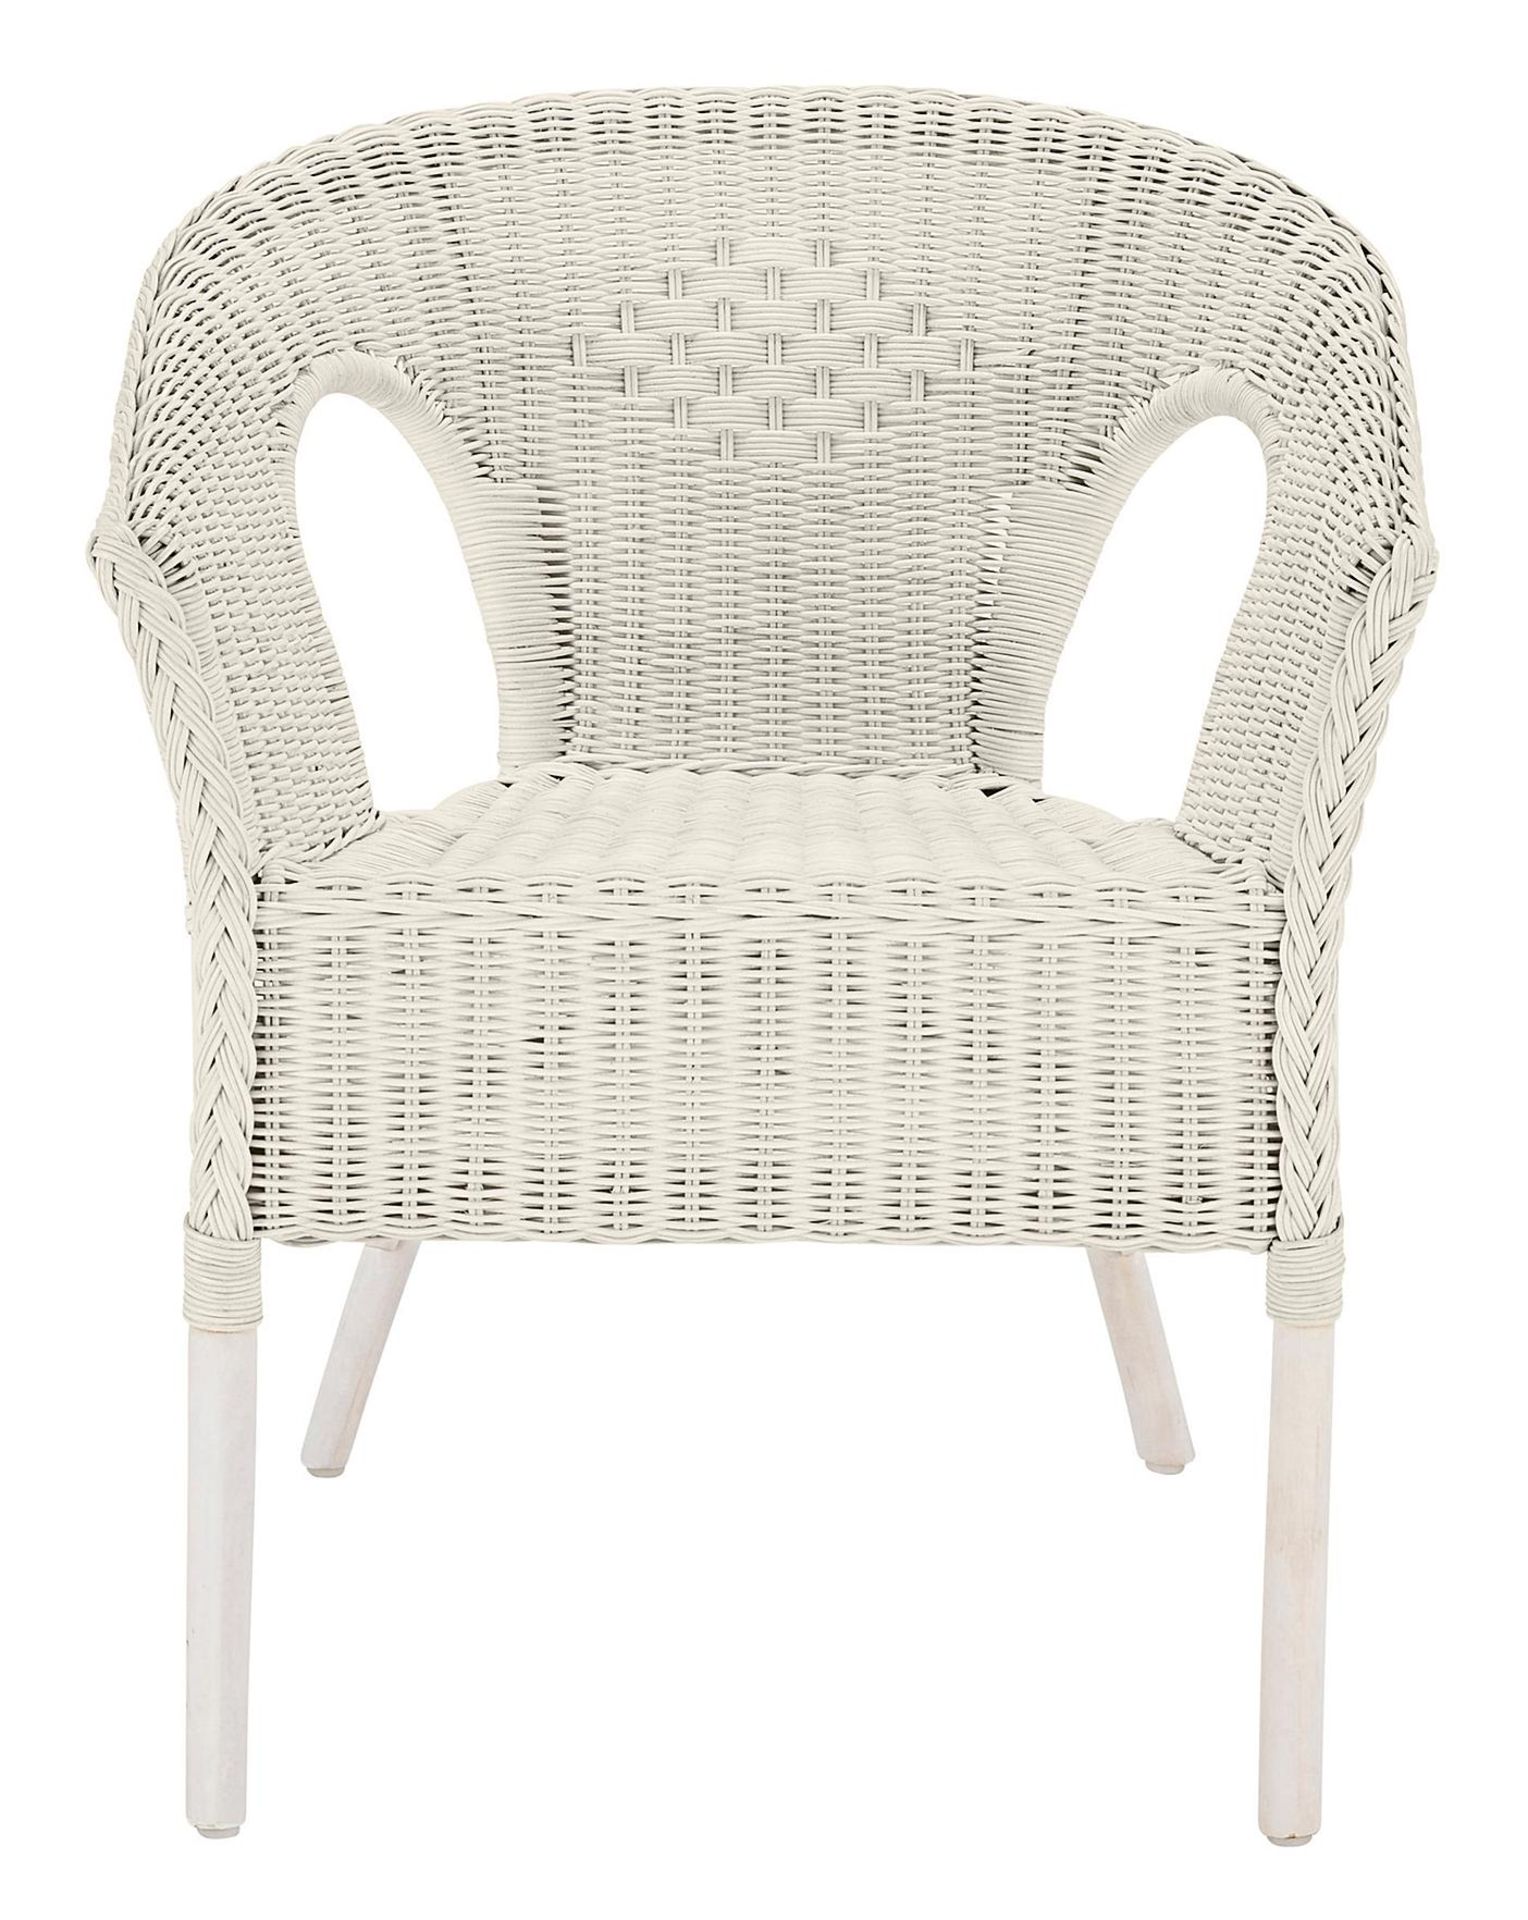 X 3 WHITE WICKER CHAIRS RRP £29 EACH £87 TOTALCondition ReportAppraisal Available on Request- All